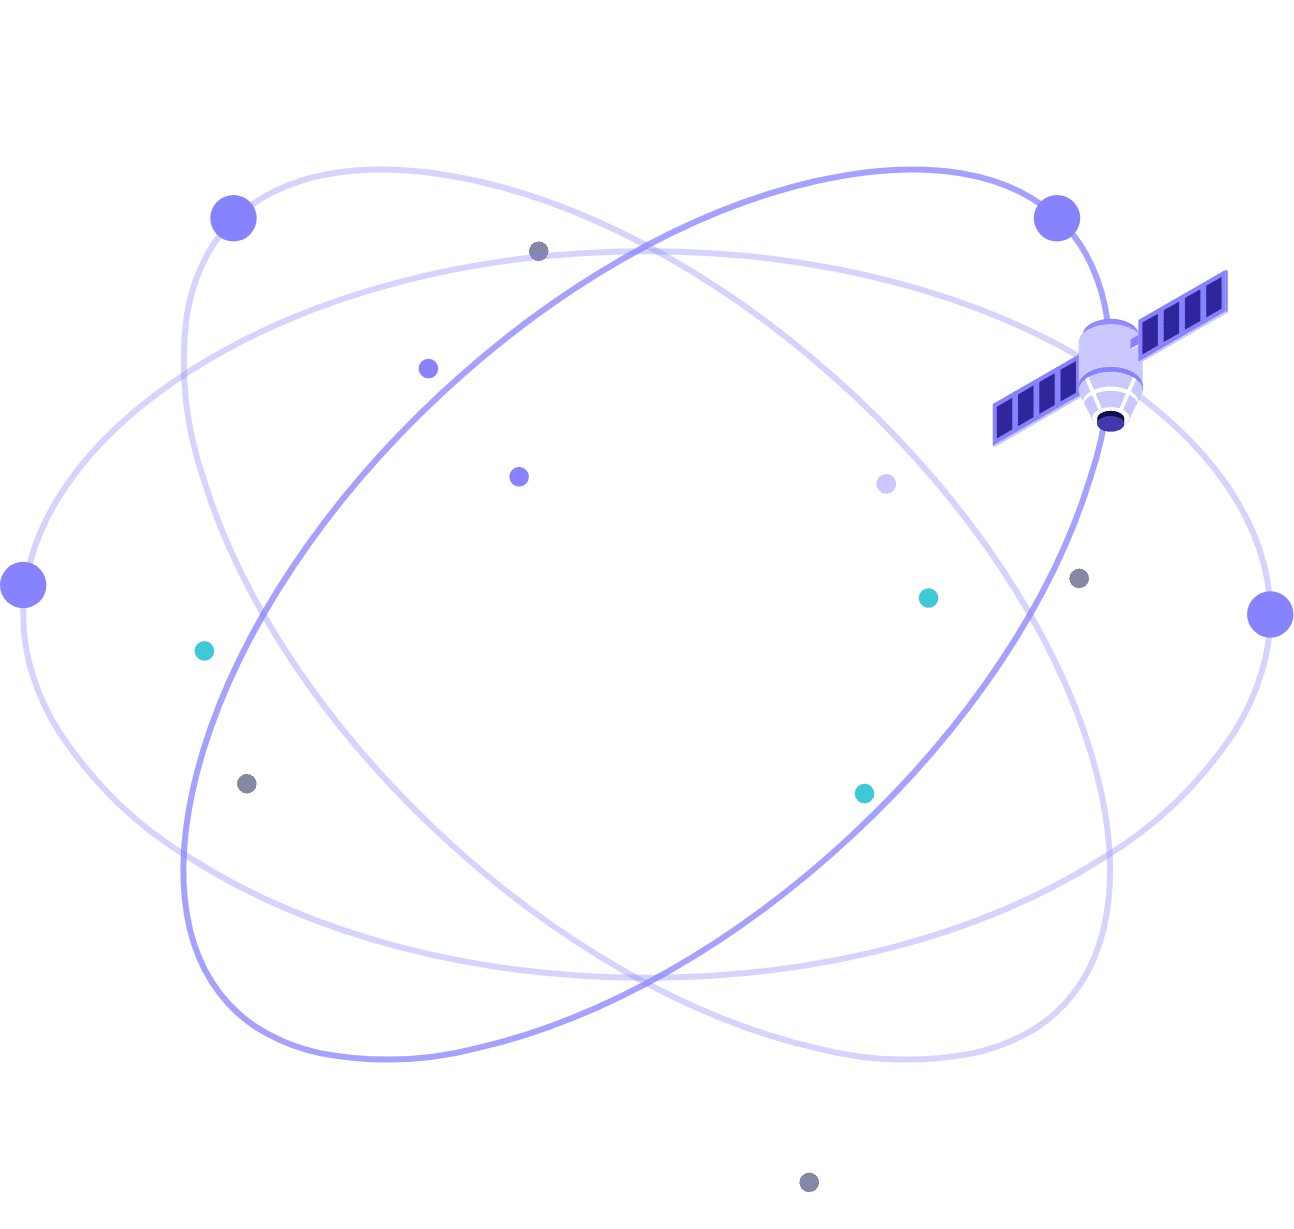 planets and satellite orbiting path